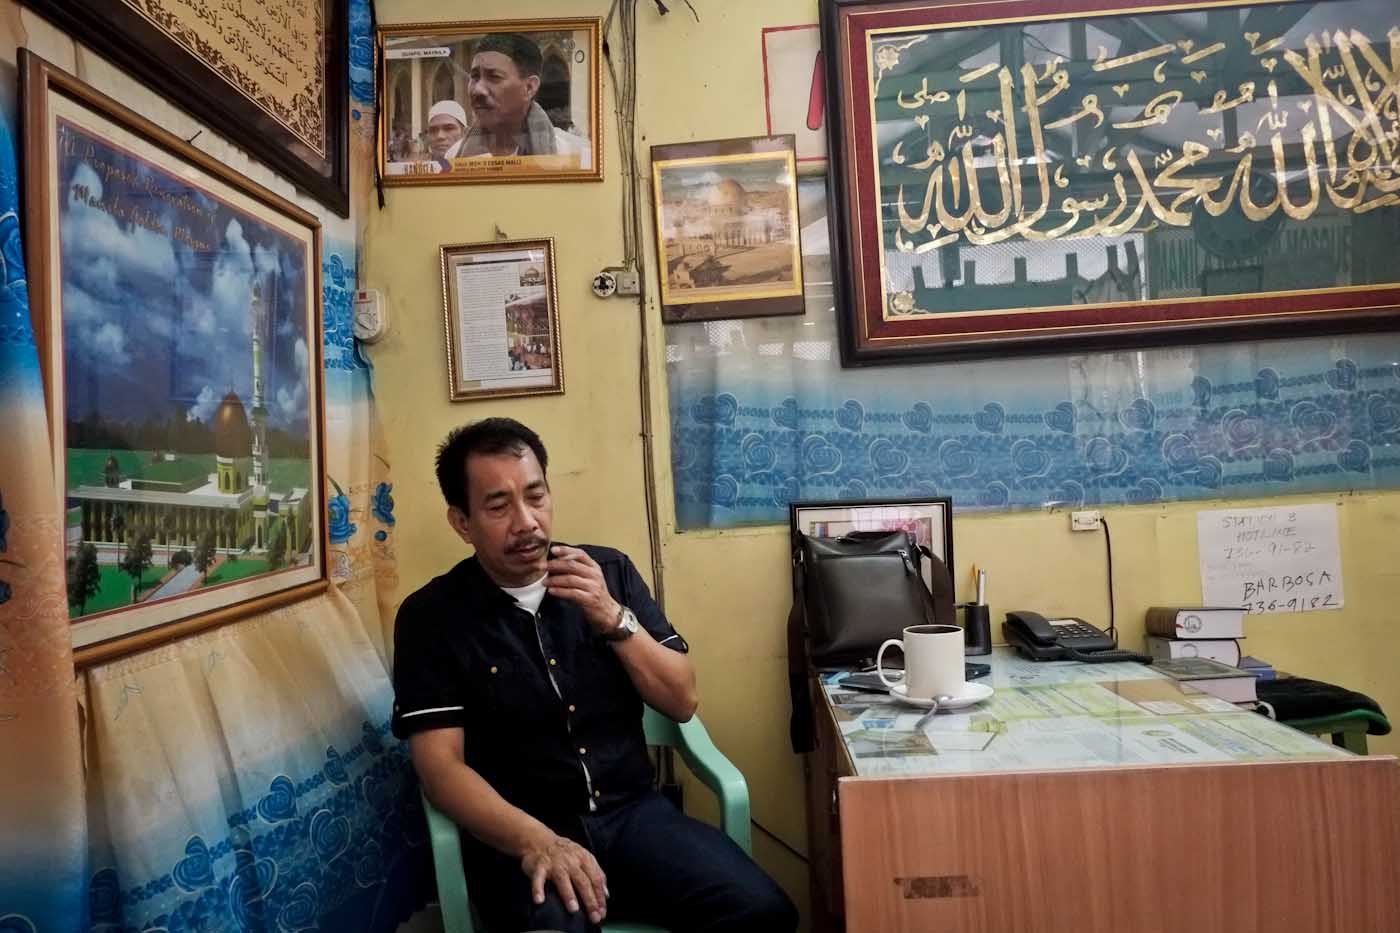 THE PILGRIM. Hajji Moh’d Ersad Malli, who has been to Mecca 24 times, puts into historical context the reasons why Muslims in Mindanao are fighting for their land.  